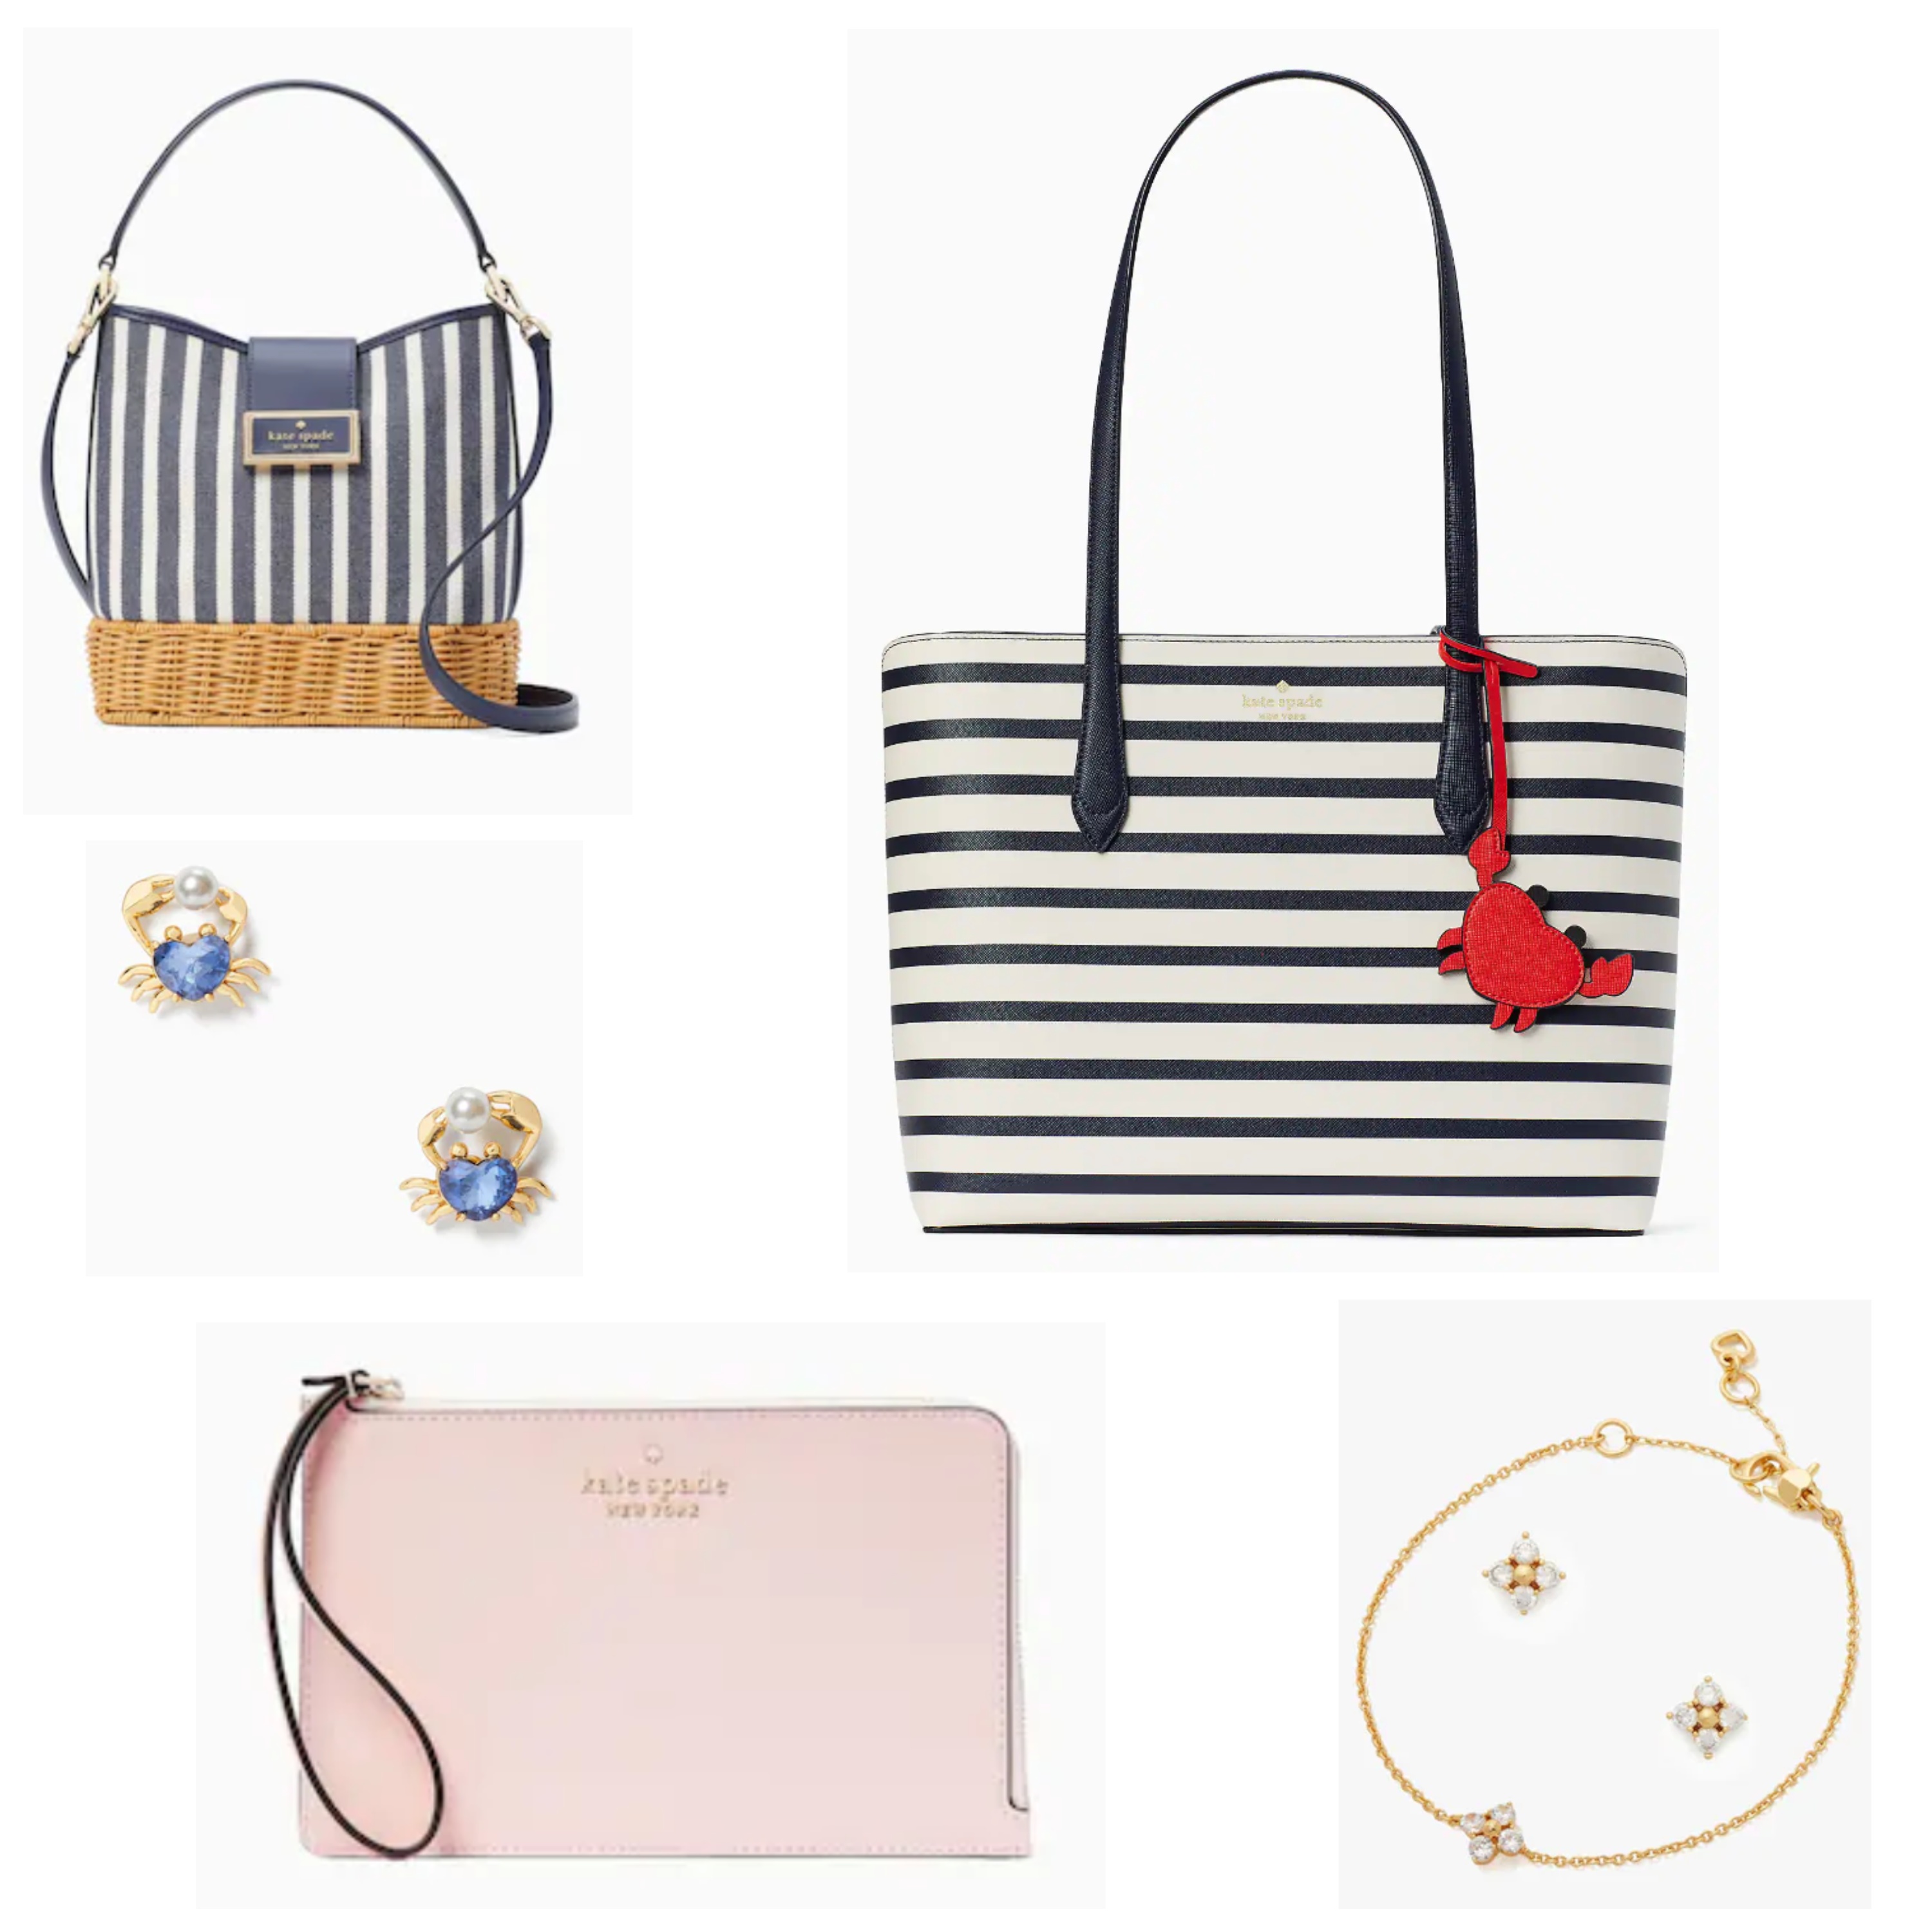 Shop 75% Off Kate Spade Bags & More That Are Perfect for Date Night